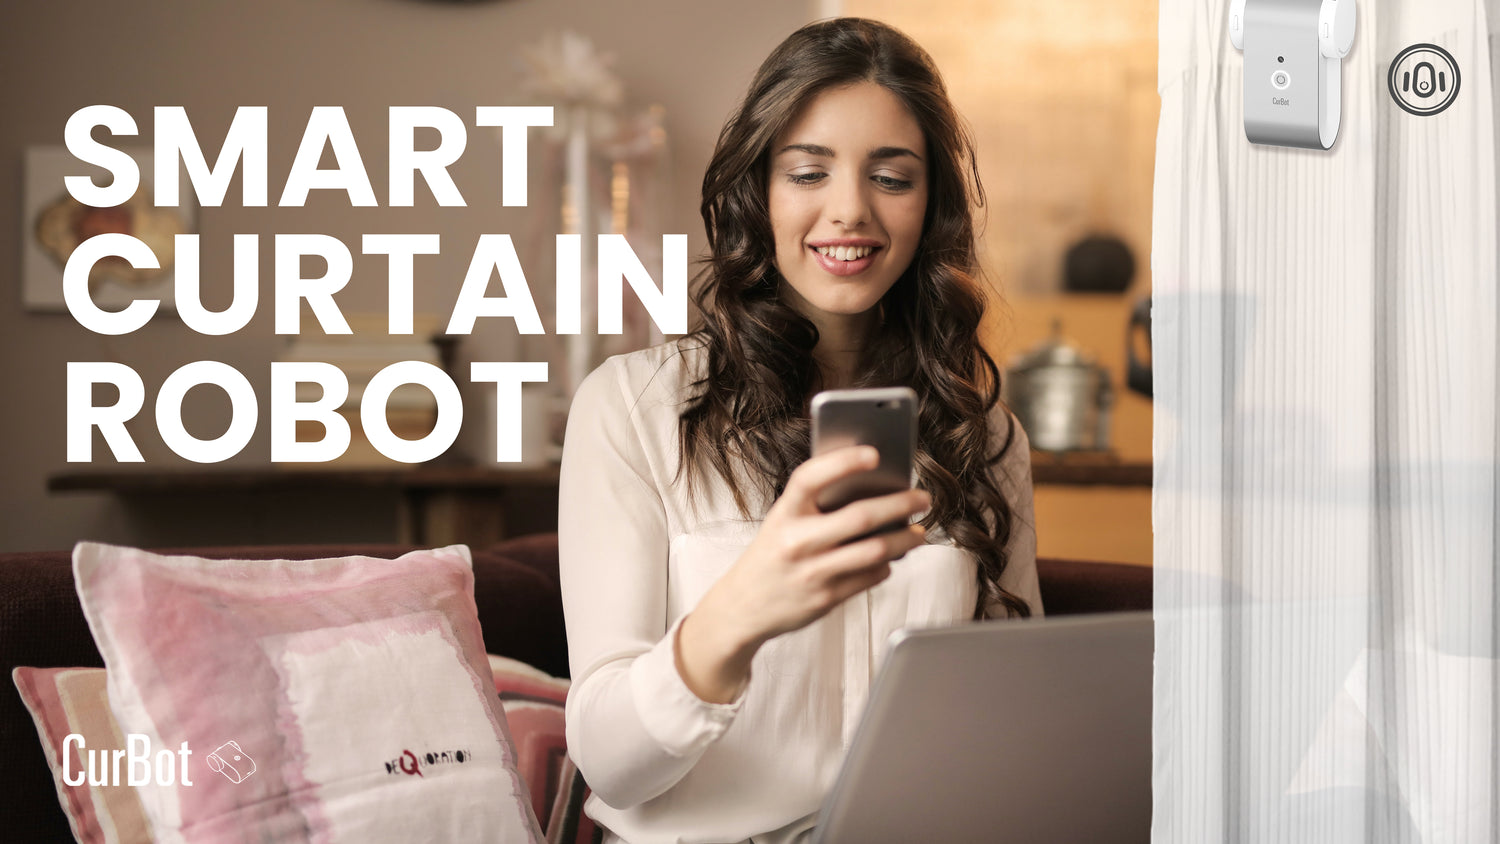 CurBot - The Necessity of Automating Your Bedroom Curtains